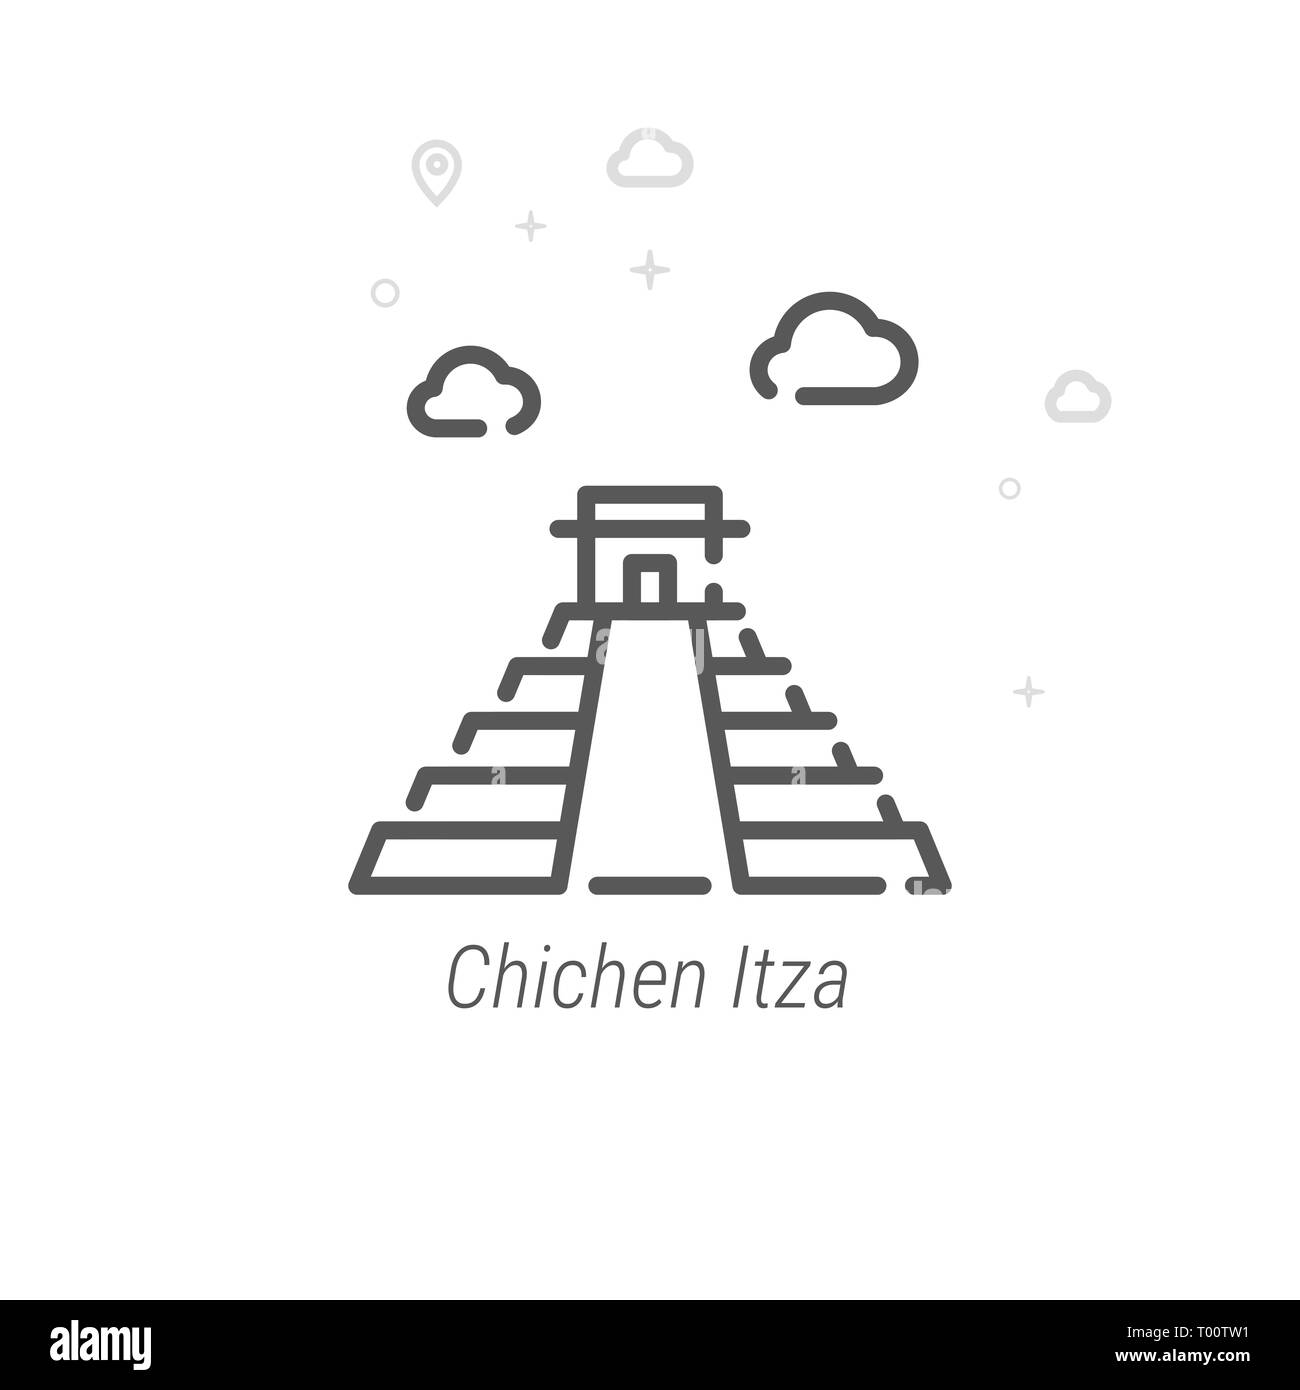 Chichen Itza, Mexico Line Icon. Historical Landmarks Symbol, Pictogram, Sign. Light Abstract Geometric Background. Editable Stroke. Adjust Line Weight Stock Photo